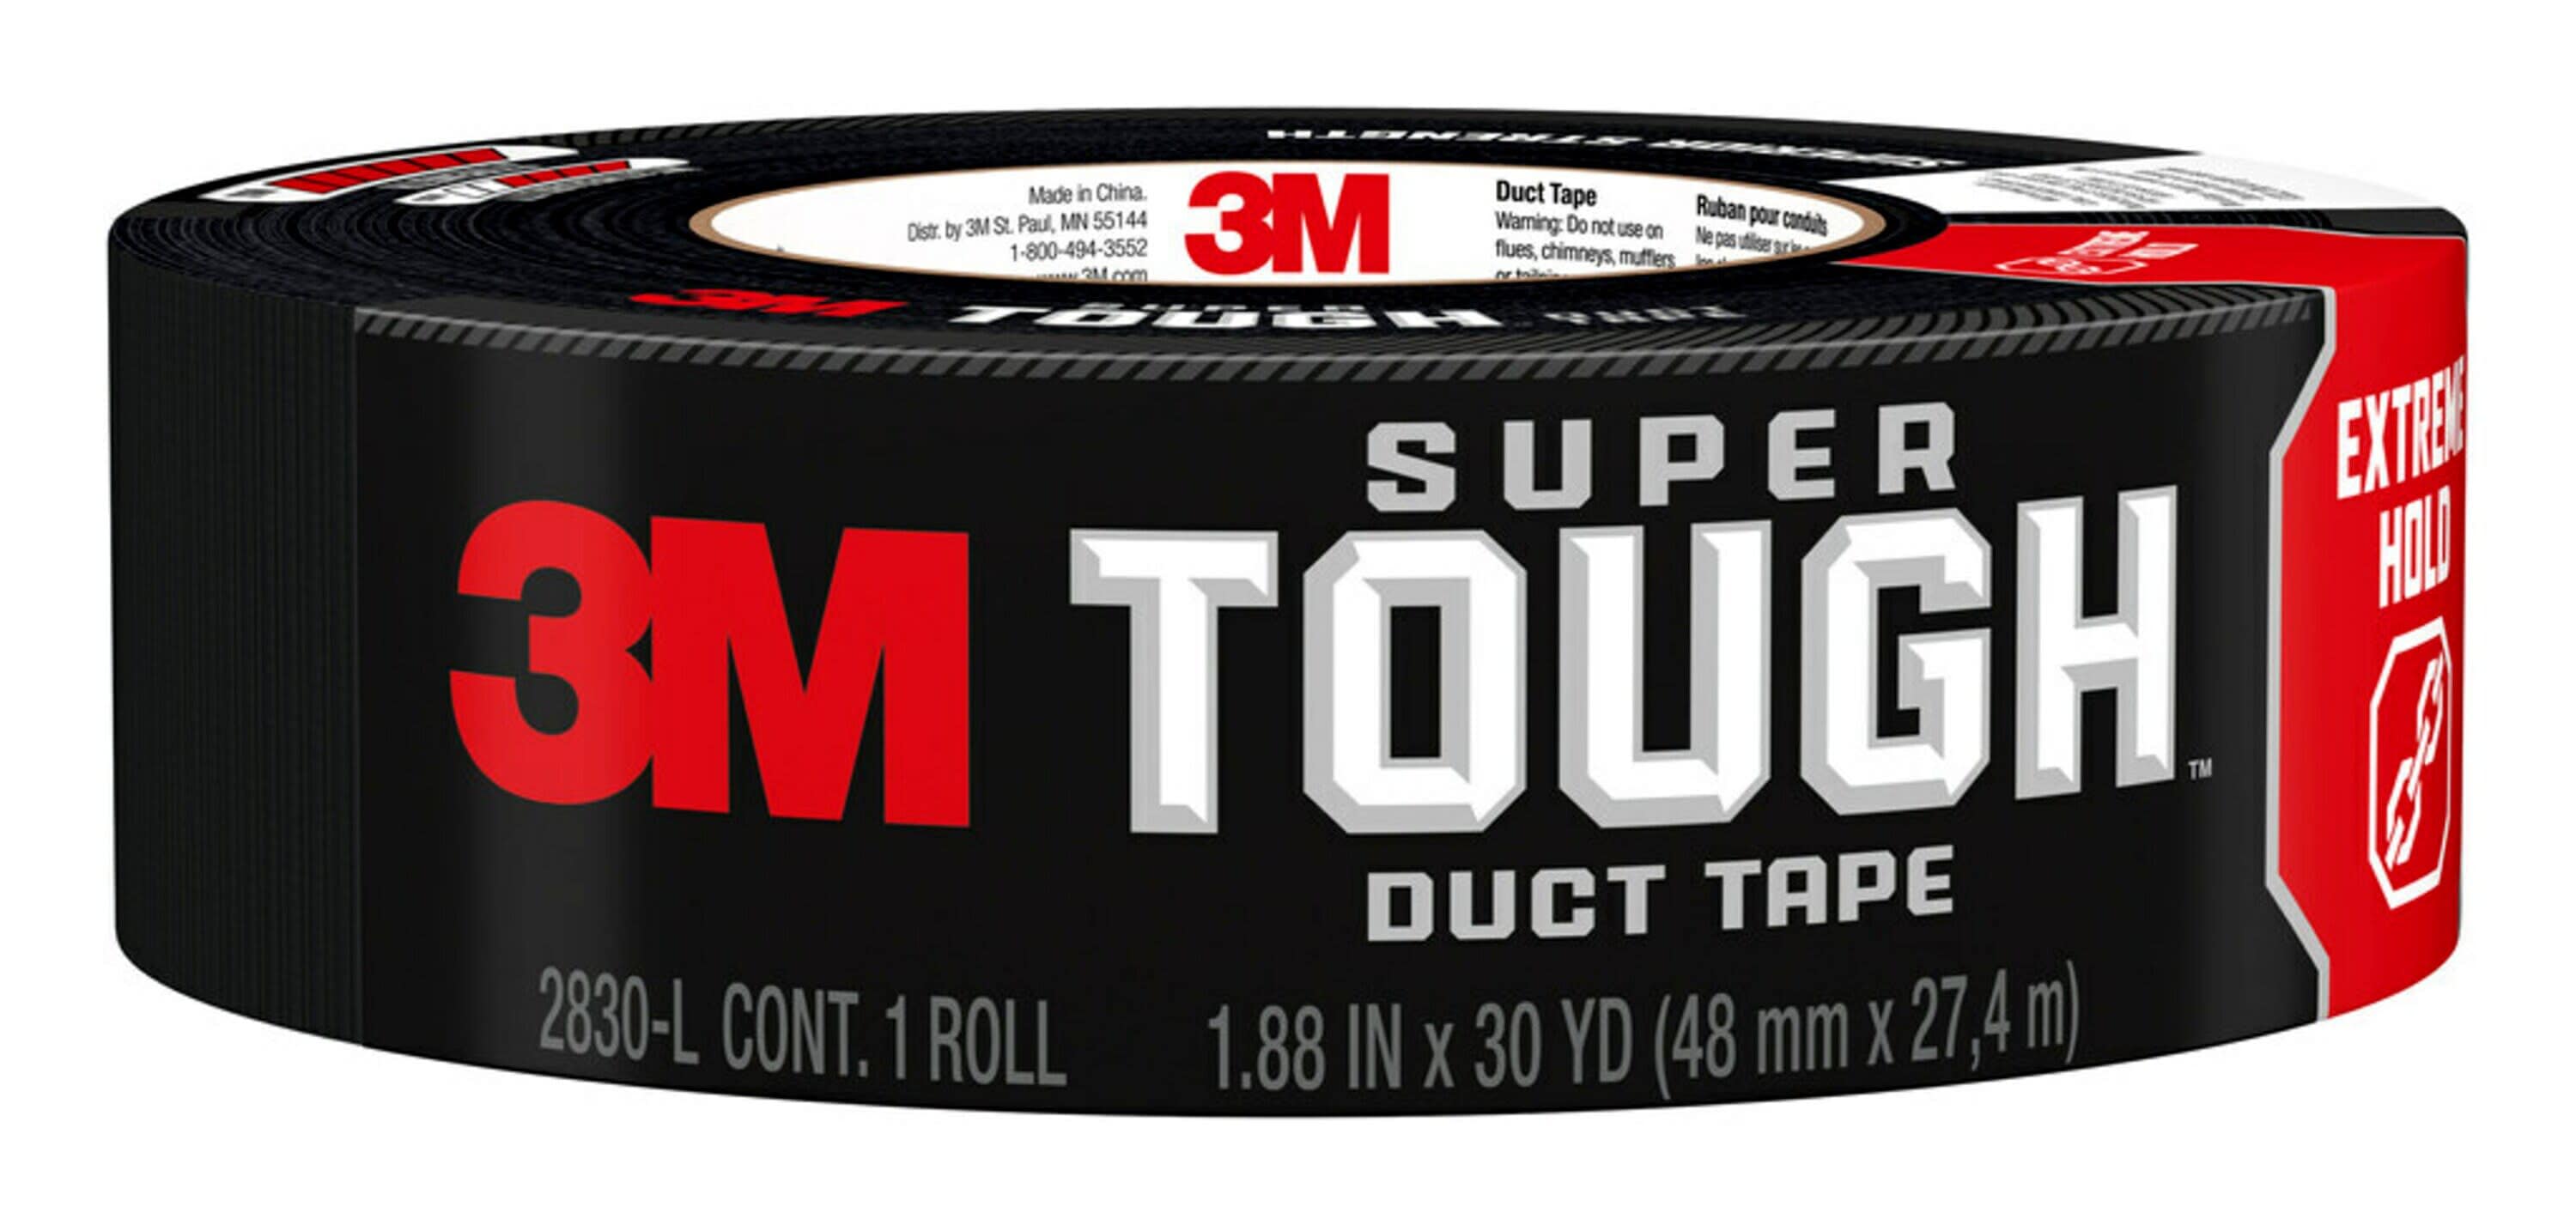 Duct Tape Heavy Duty Black Color Roll| Waterproof, Durable, Multipurpose Utility Strip for Repair and Home Use by Emraw 0028